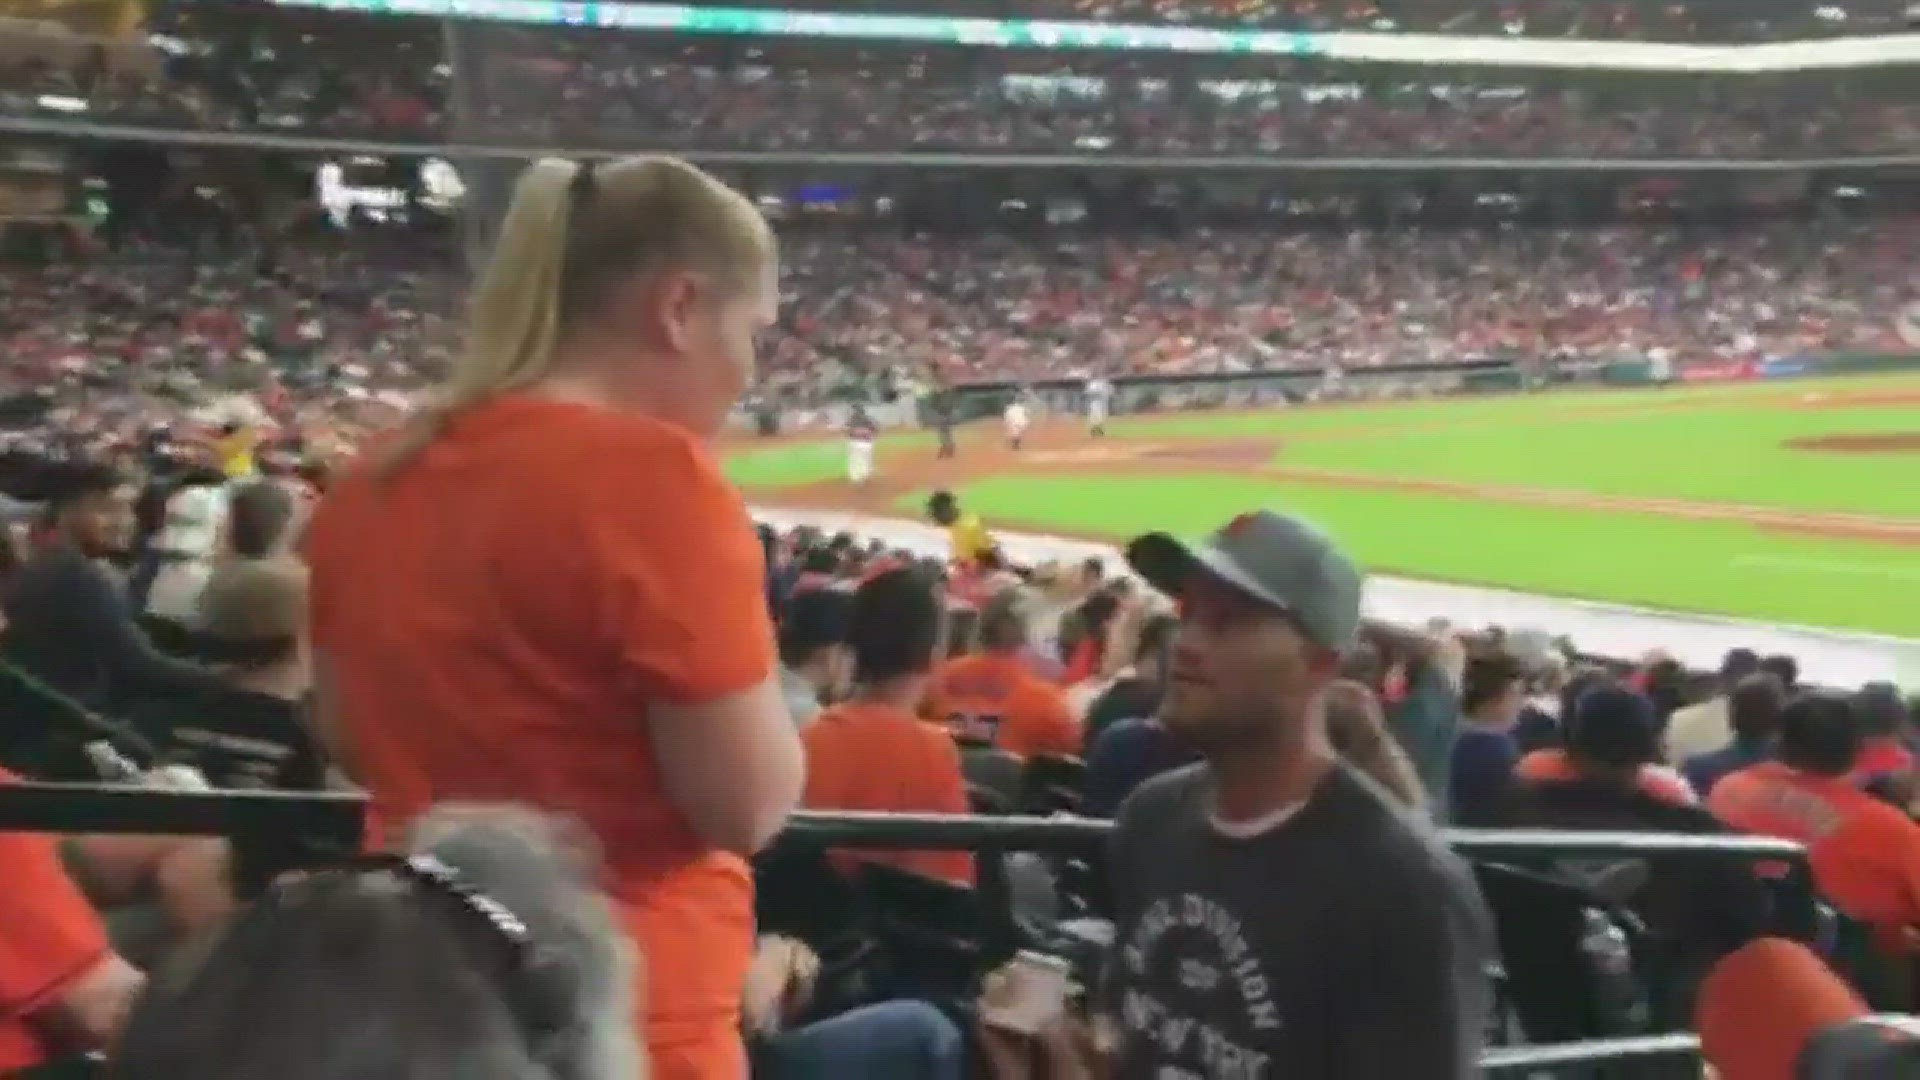 Love was in the air at the Astros and Detroit Tigers game at Minute Maid Park on Sunday. A marriage proposal was caught on camera by KHOU 11 Anchor Greg Hurst.